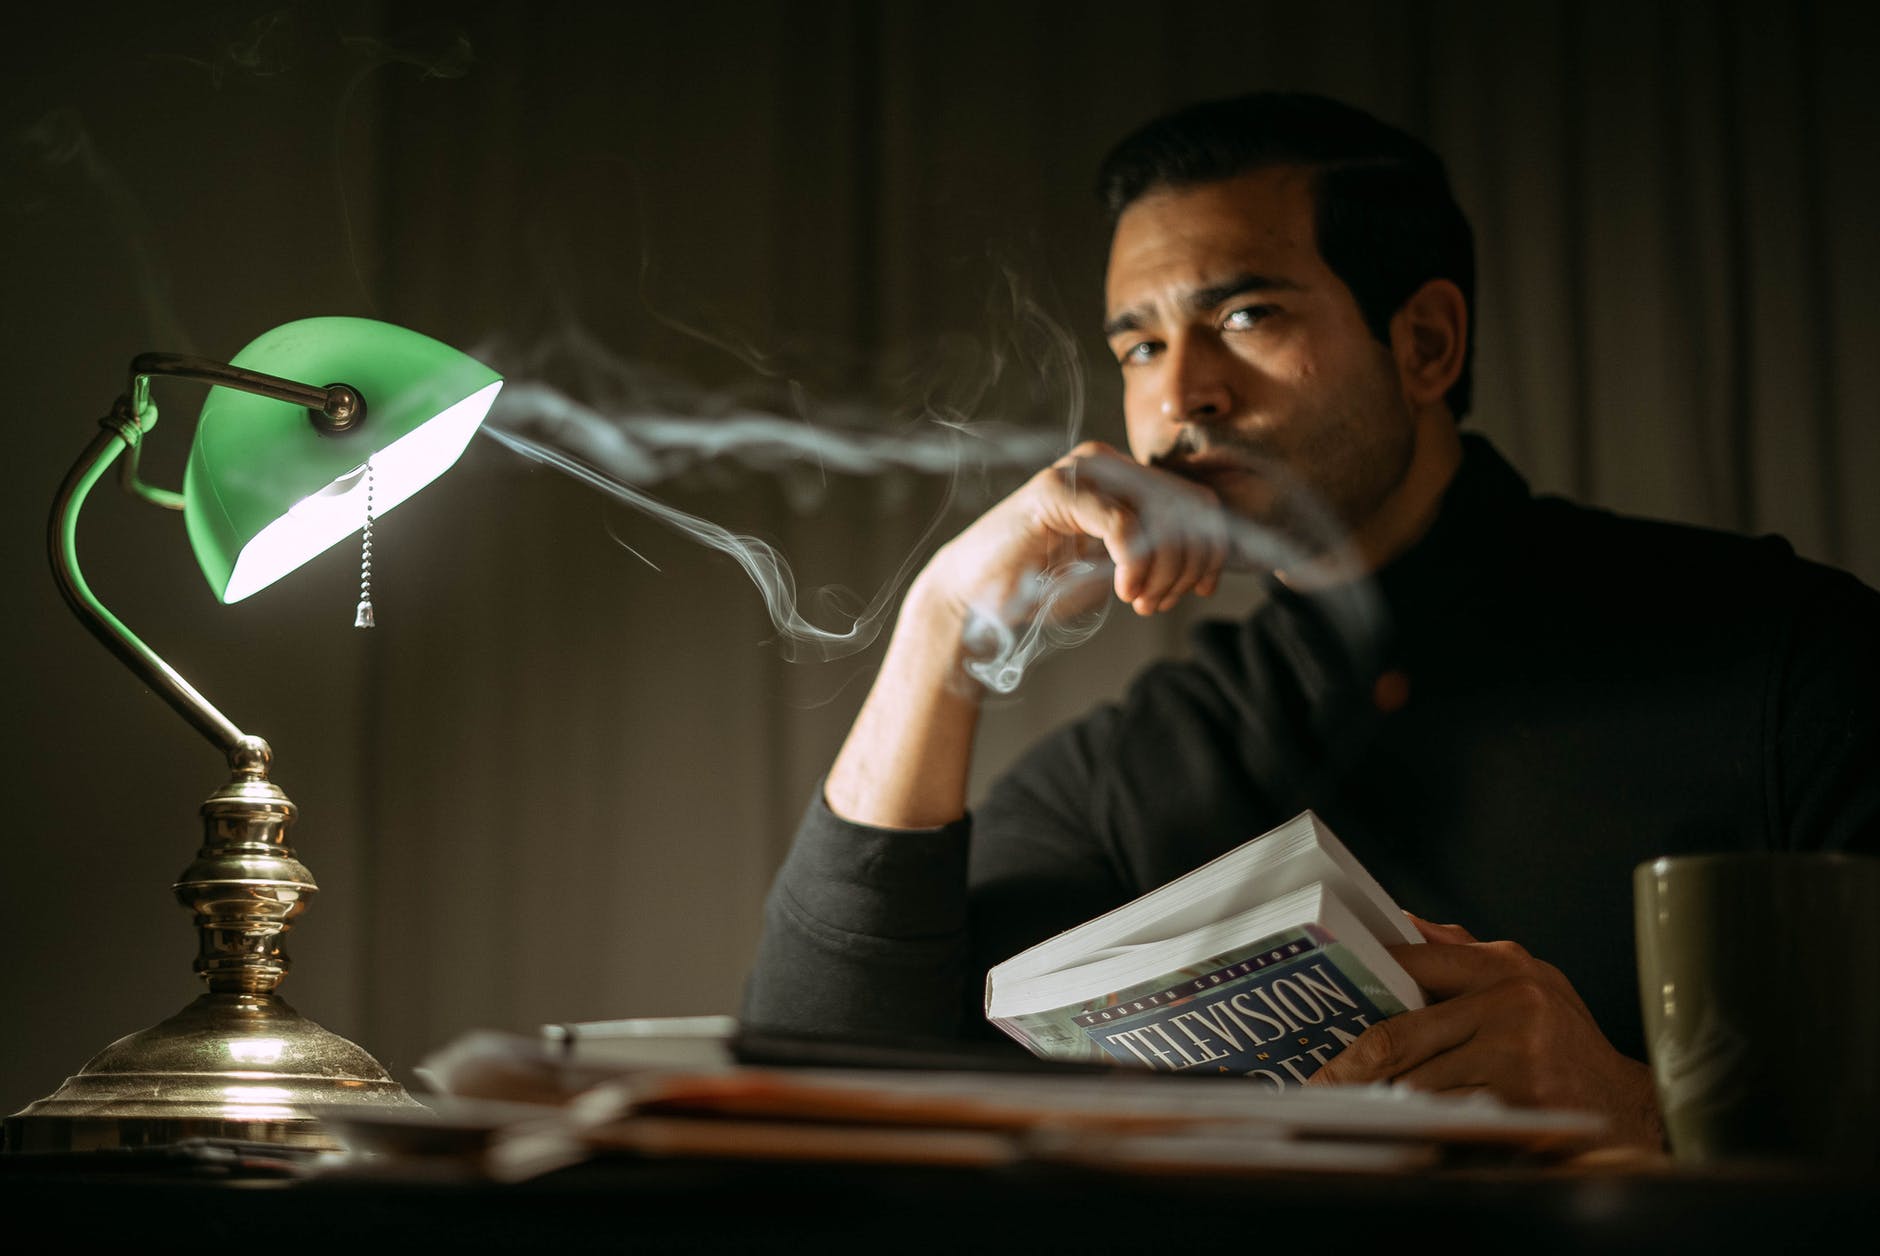 thoughtful man with book sitting in dark room